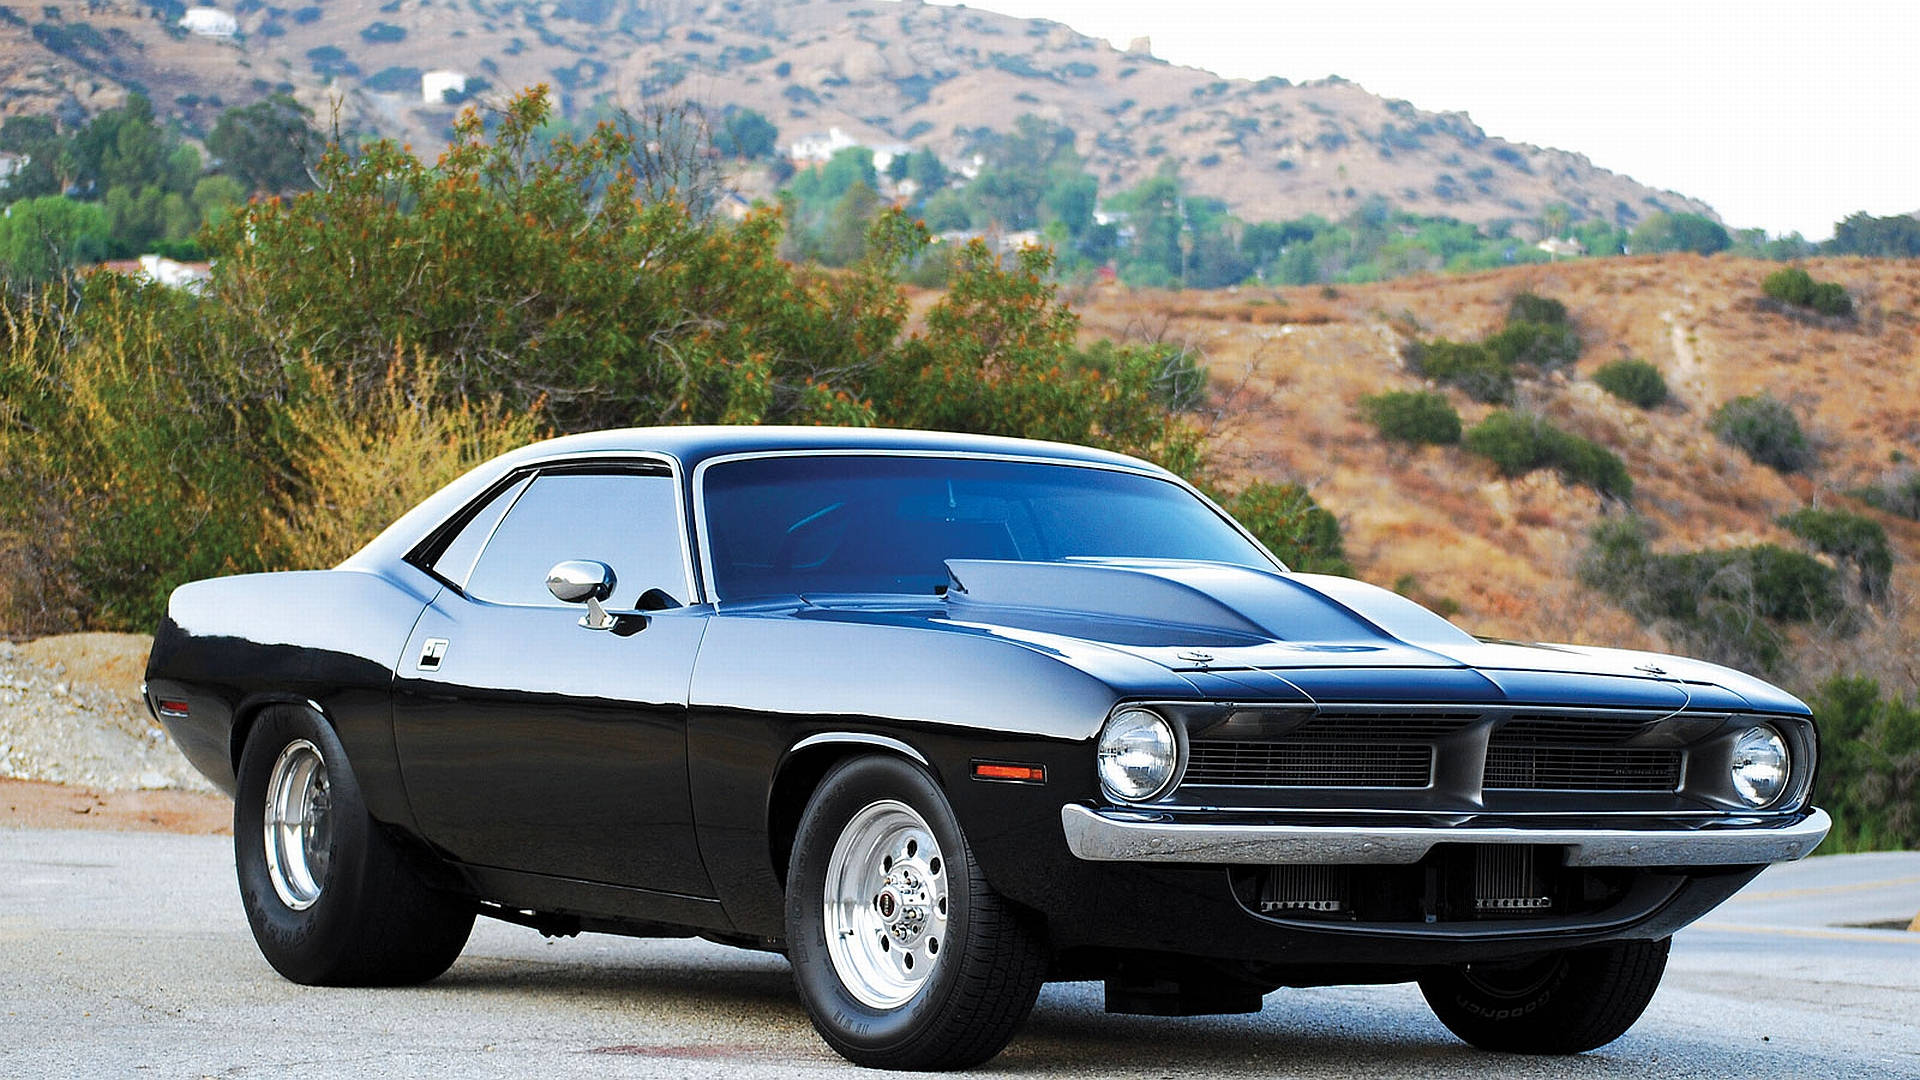 Iconic 1970 Plymouth Barracuda in Glossy Black Wallpaper